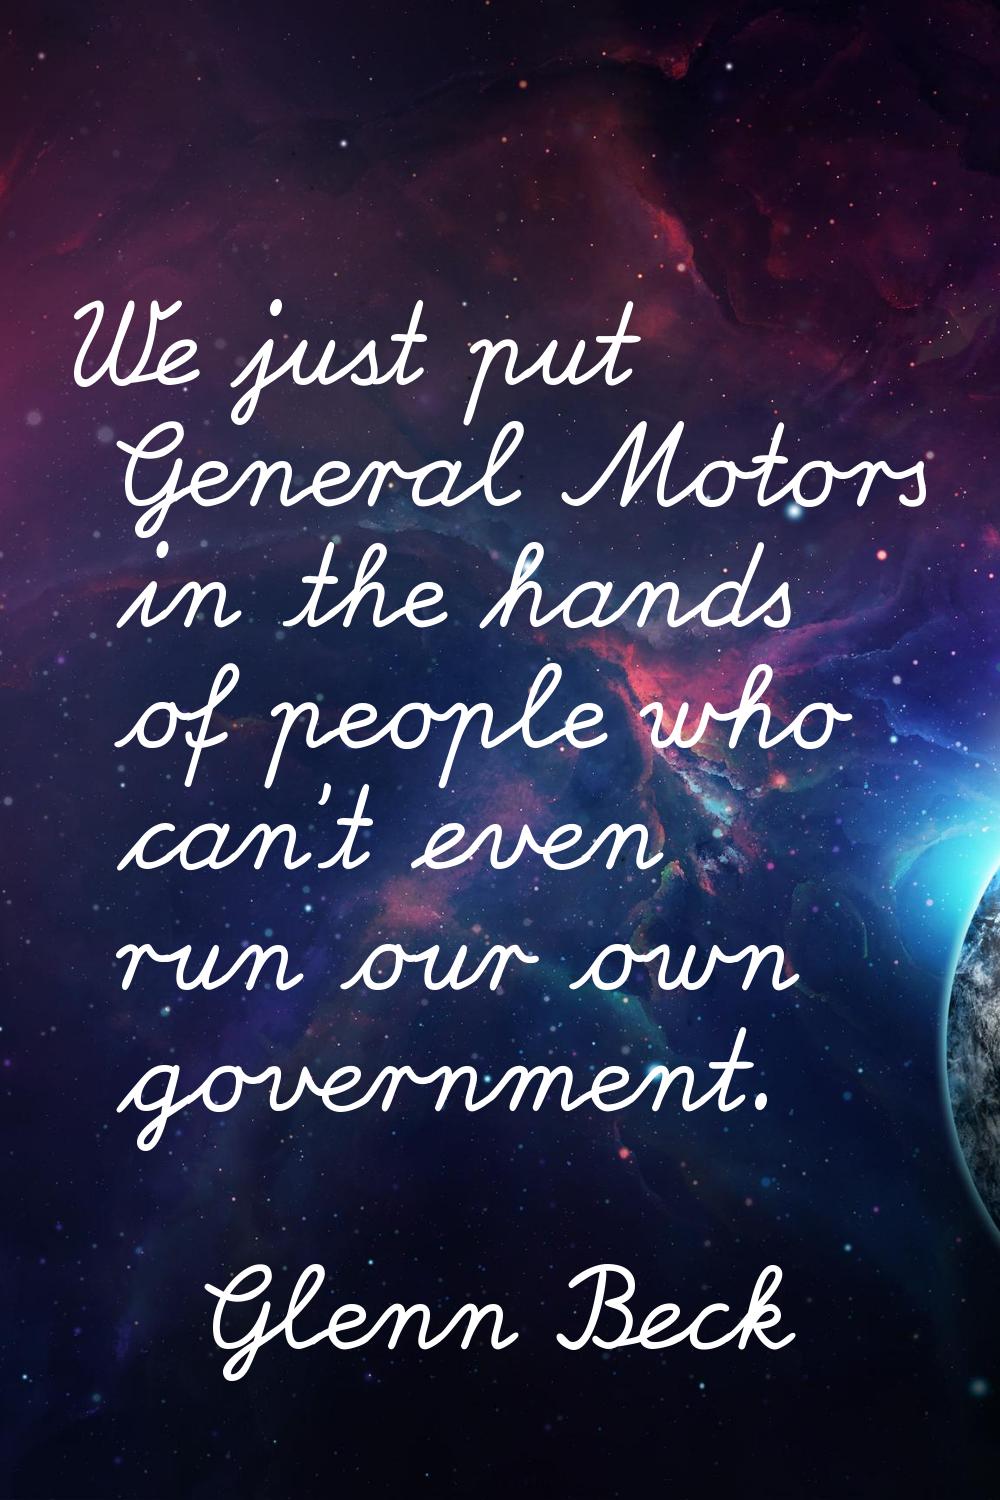 We just put General Motors in the hands of people who can't even run our own government.